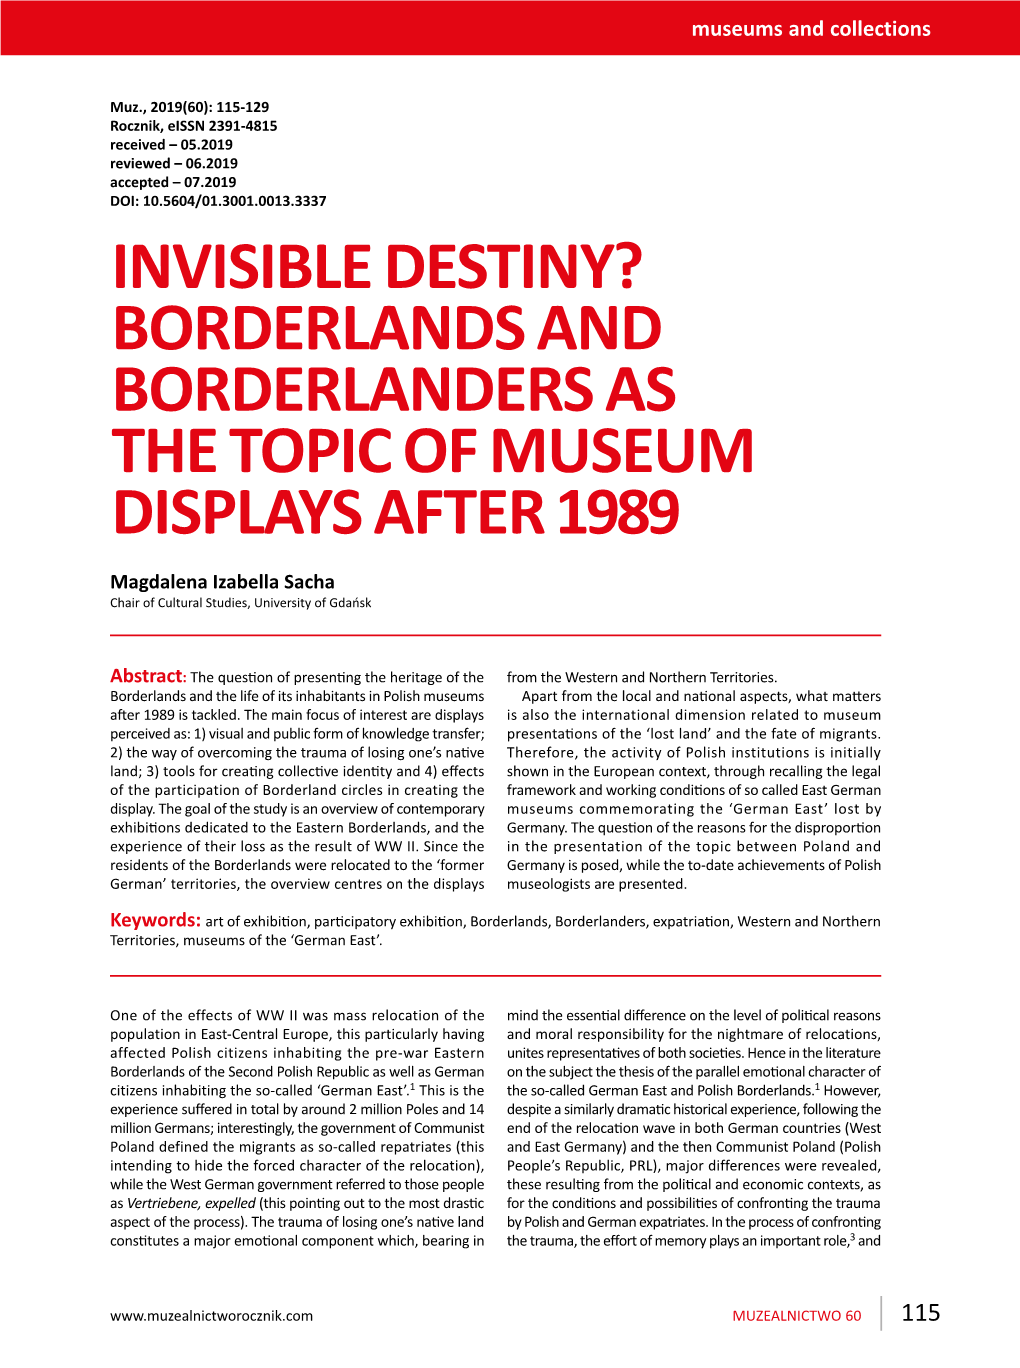 BORDERLANDS and BORDERLANDERS AS the TOPIC of MUSEUM DISPLAYS AFTER 1989 Magdalena Izabella Sacha Chair of Cultural Studies, University of Gdańsk